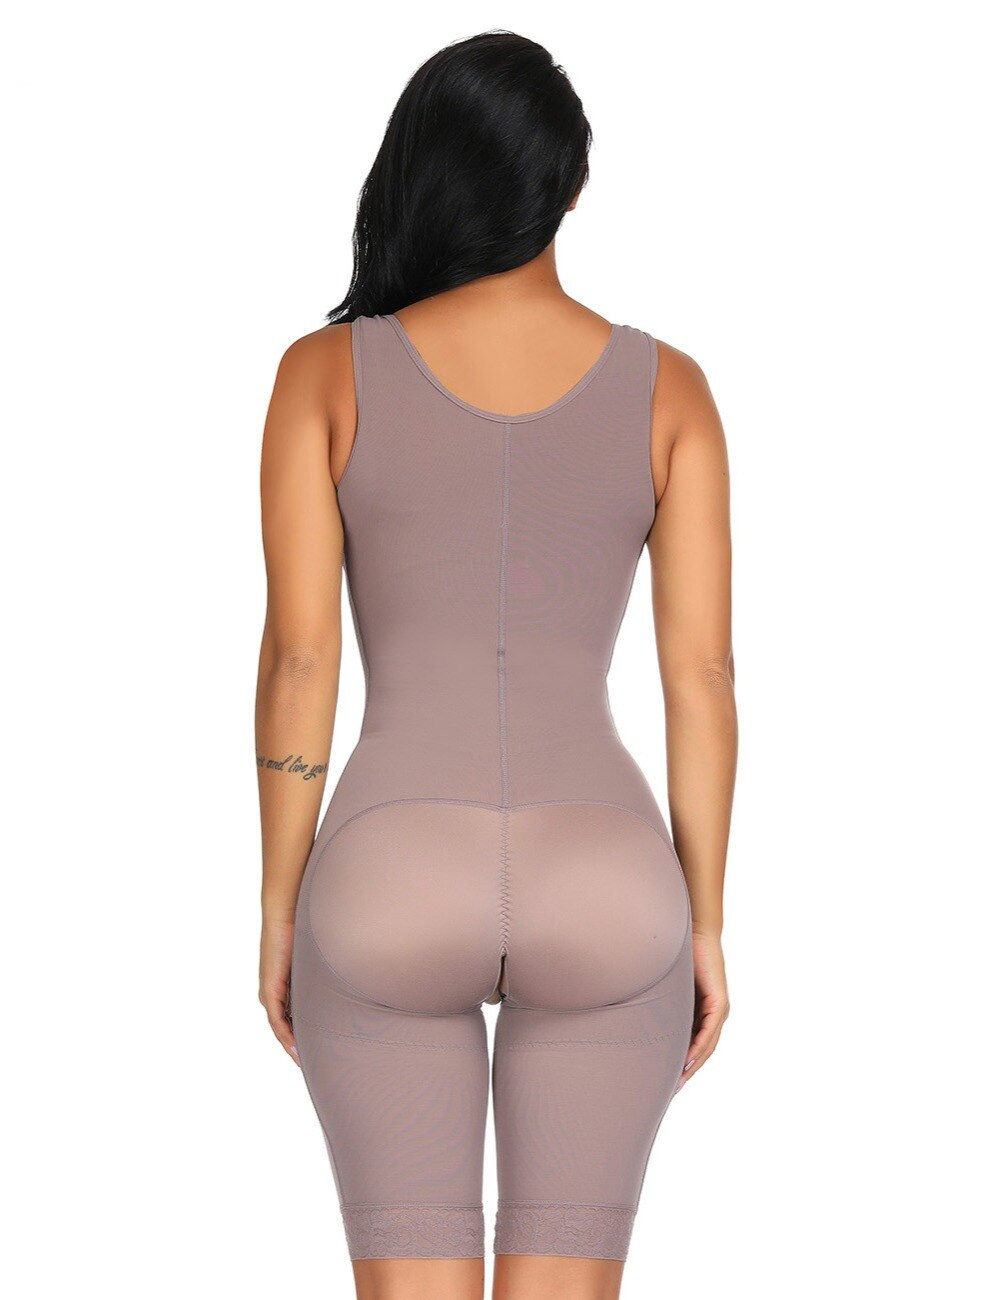 Full Body Shapewear Tummy Control Waist Trainer Corset Women Binders and Shapers Thigh Trimmer Butt Lifter Slimming Underwear